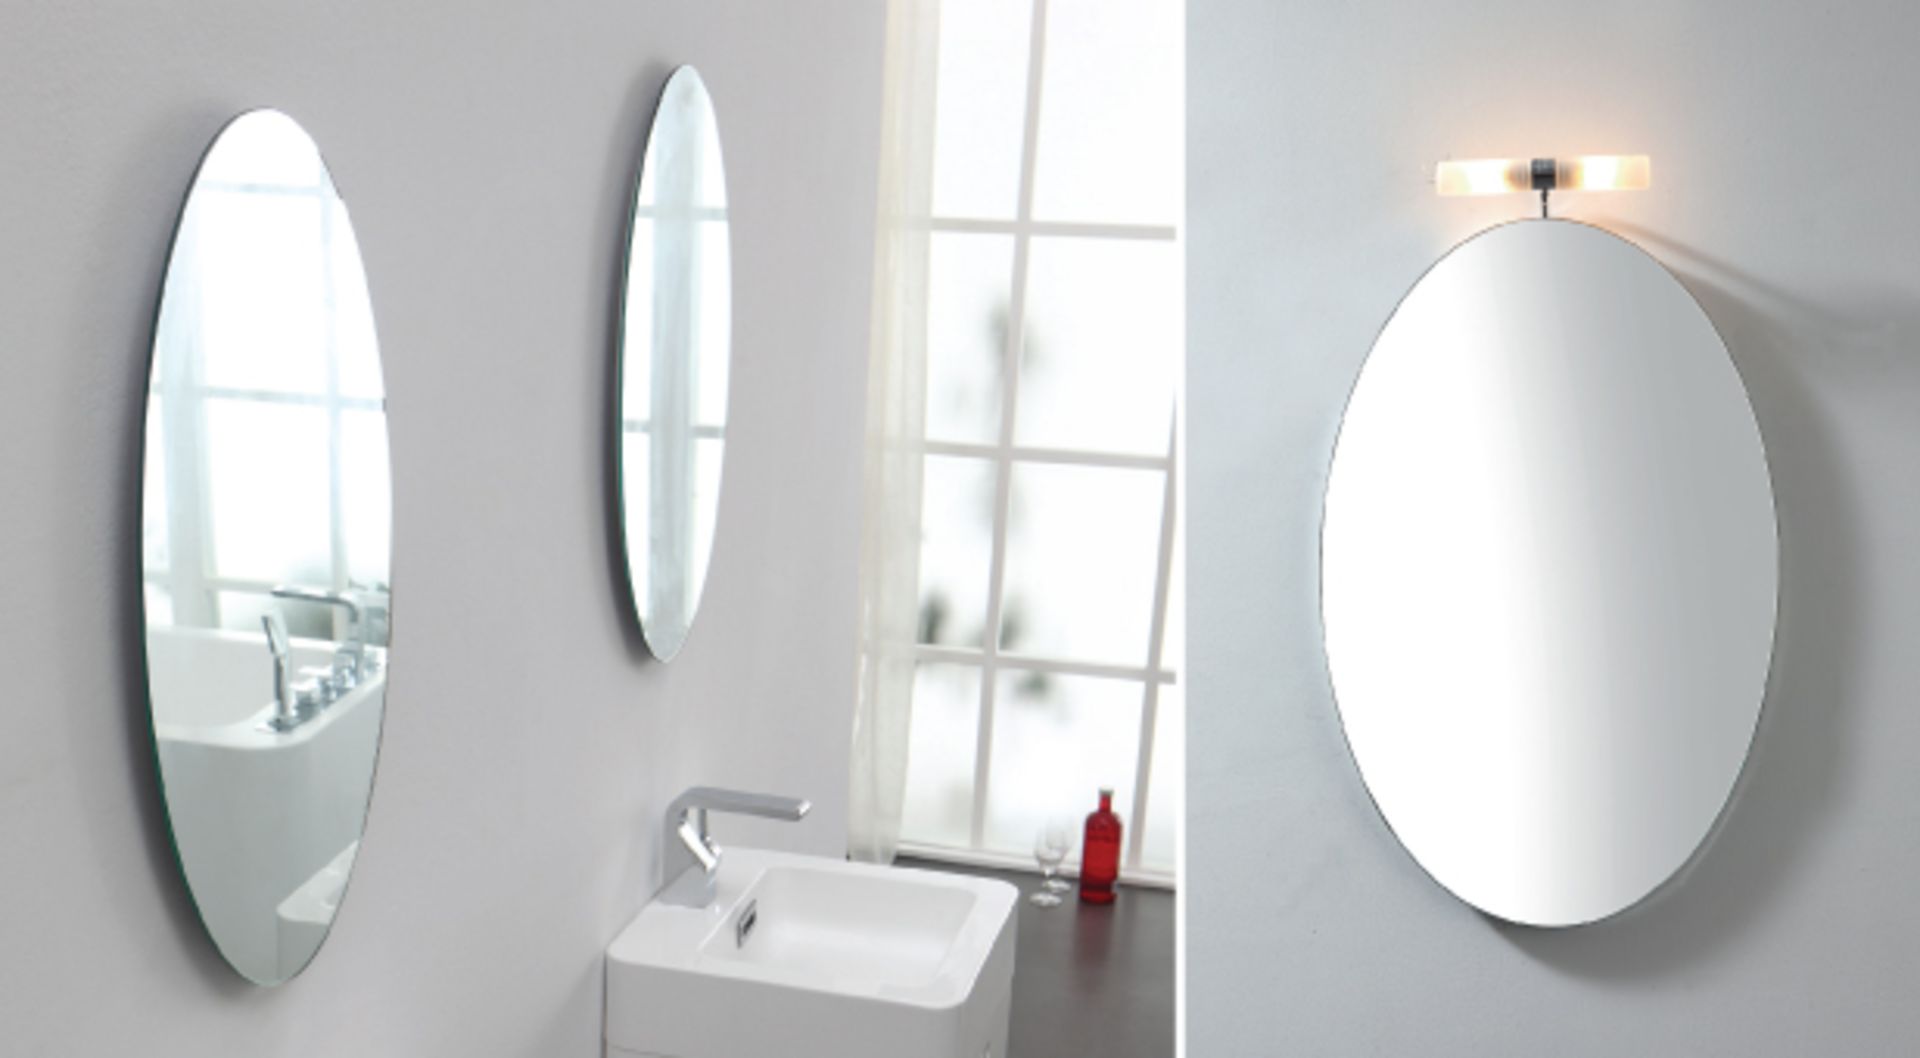 1 x Stylish Bathroom Oval Mirror 45 with top light - A-Grade - Ref:AMR14-045 - CL170 - Location: - Image 2 of 4